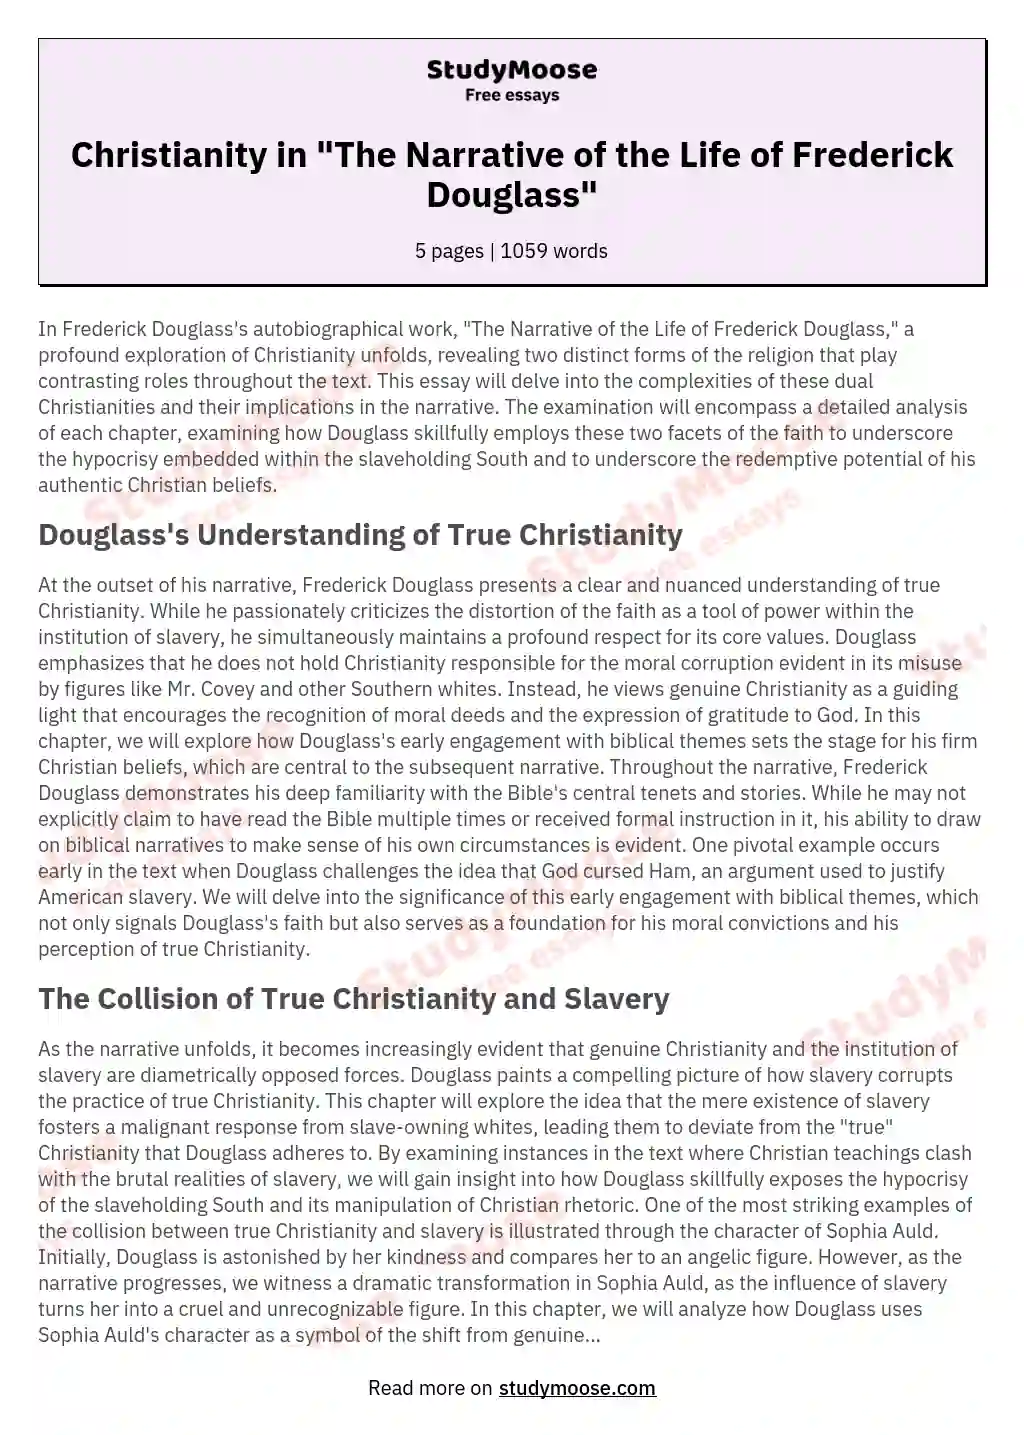 Christianity in "The Narrative of the Life of Frederick Douglass" essay